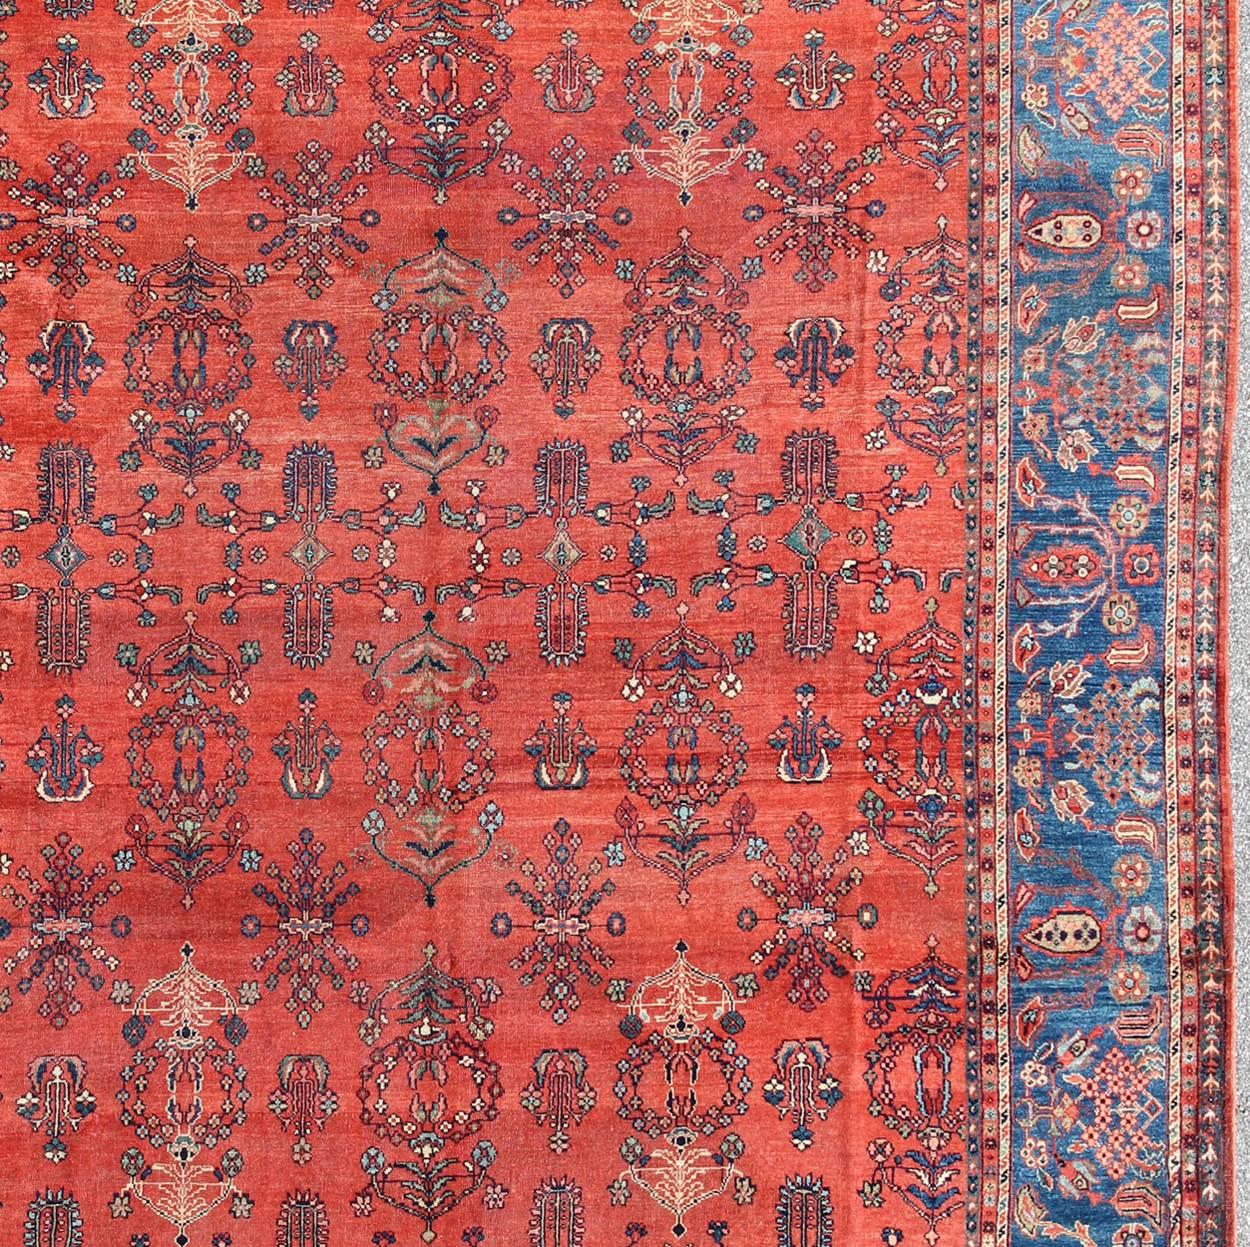 Square-Sized Antique Persian Sultanabad Rug in Terracotta Red and Medium Blue In Good Condition For Sale In Atlanta, GA